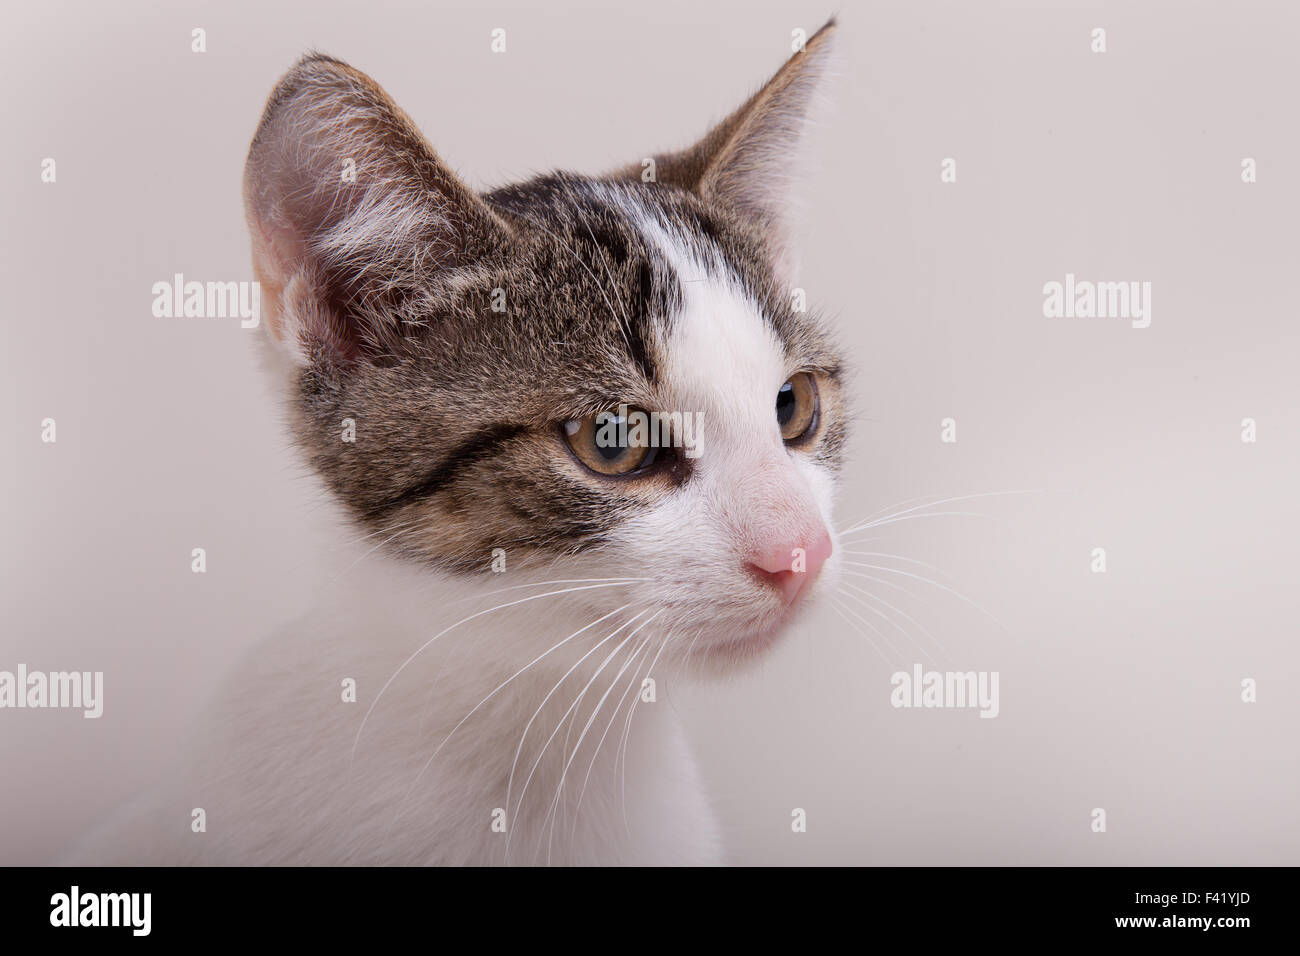 Young cat, white tabby, male, portrait Stock Photo